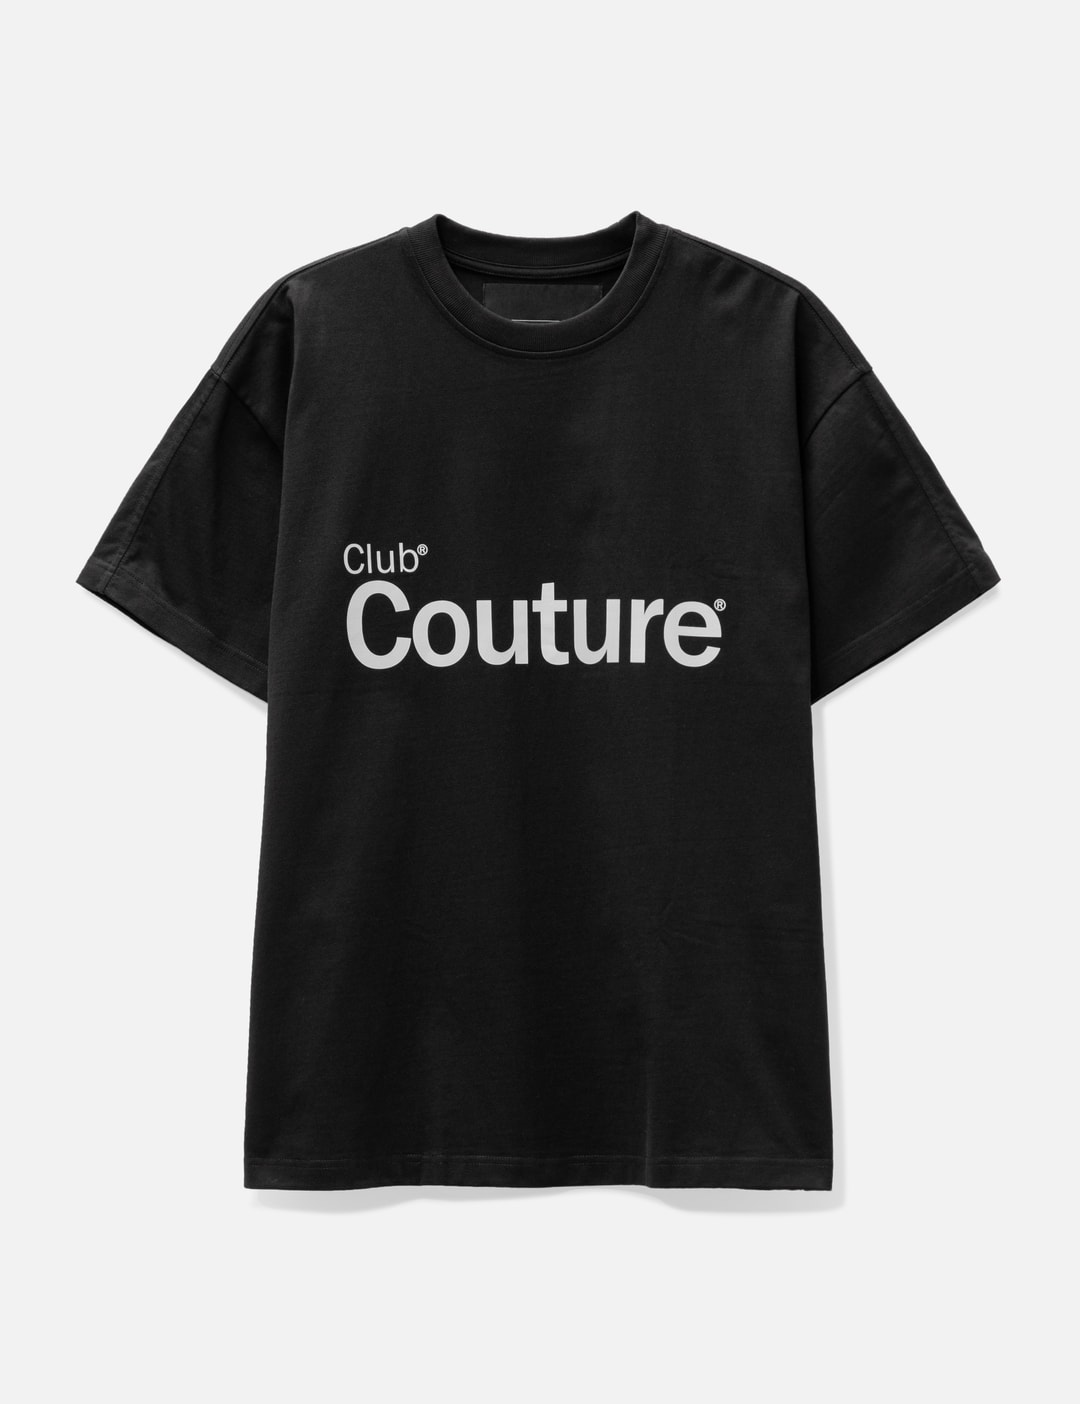 ANONYMOUS CLUB - Exclusive Club Couture T-shirt | HBX - Globally ...